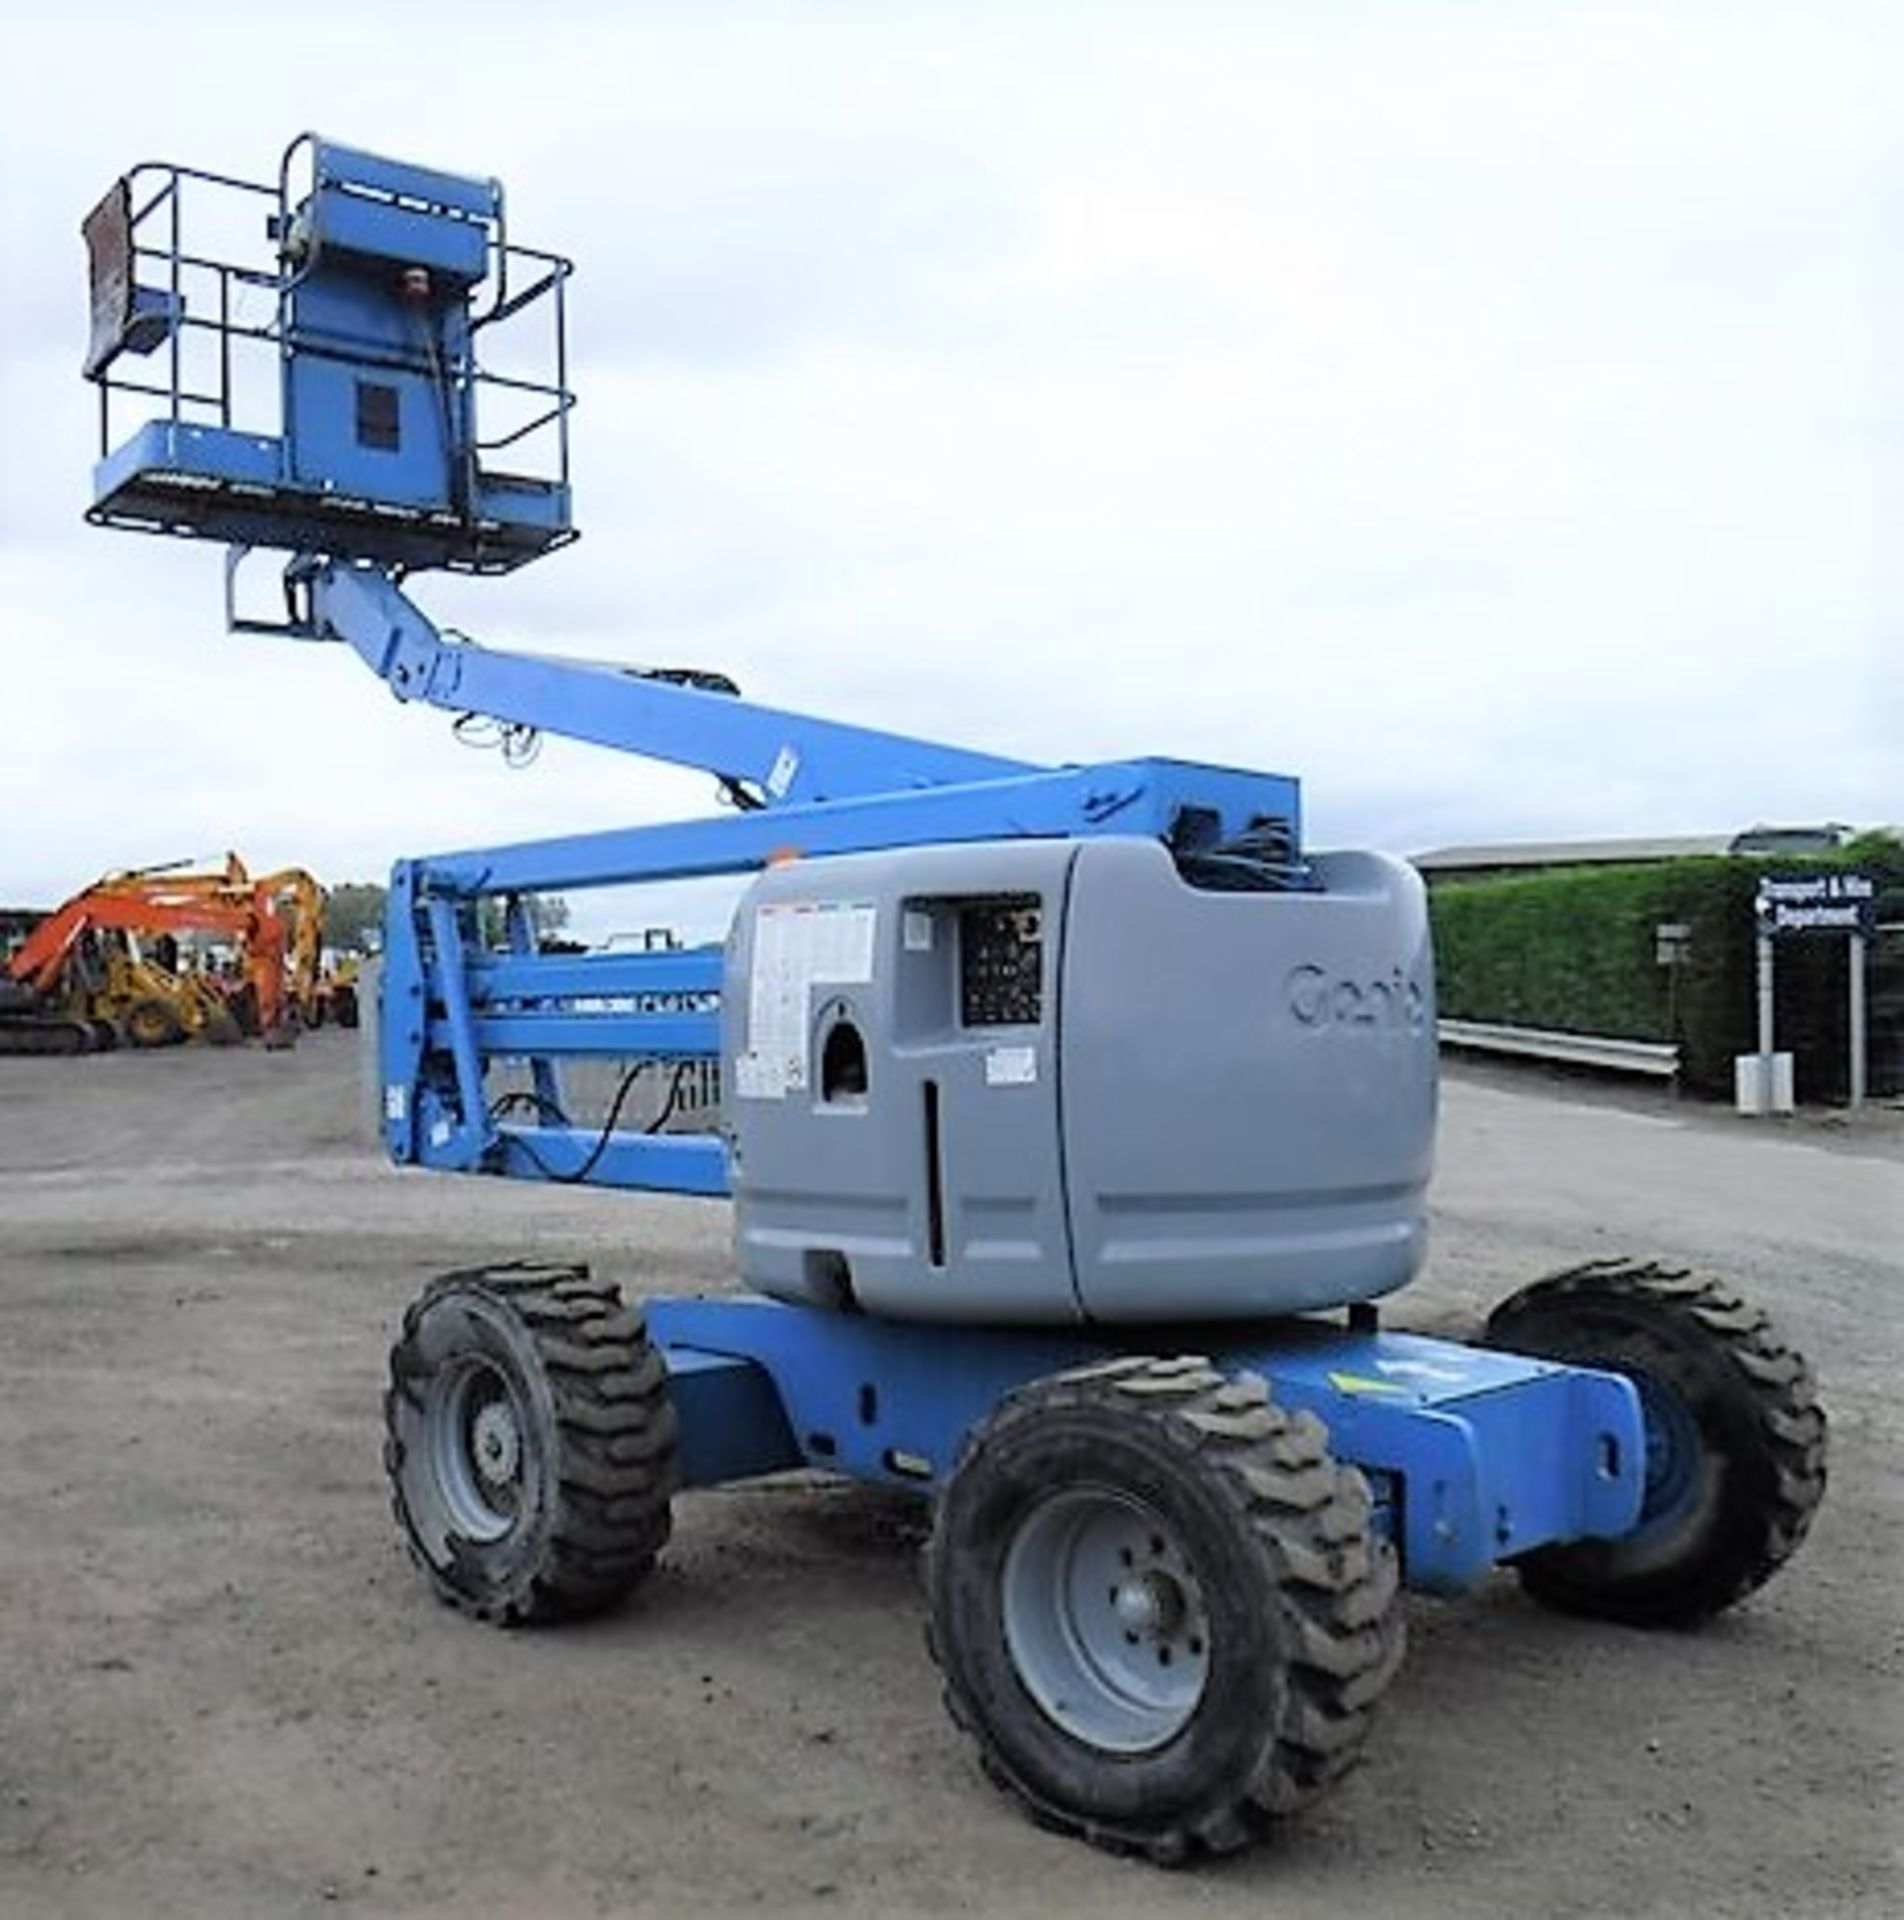 2000 GENIE BOOM LIFT Z45.25. S/N 15155. 8050.5hrs (not verified). Max working height 15.8m, outreach - Image 22 of 28